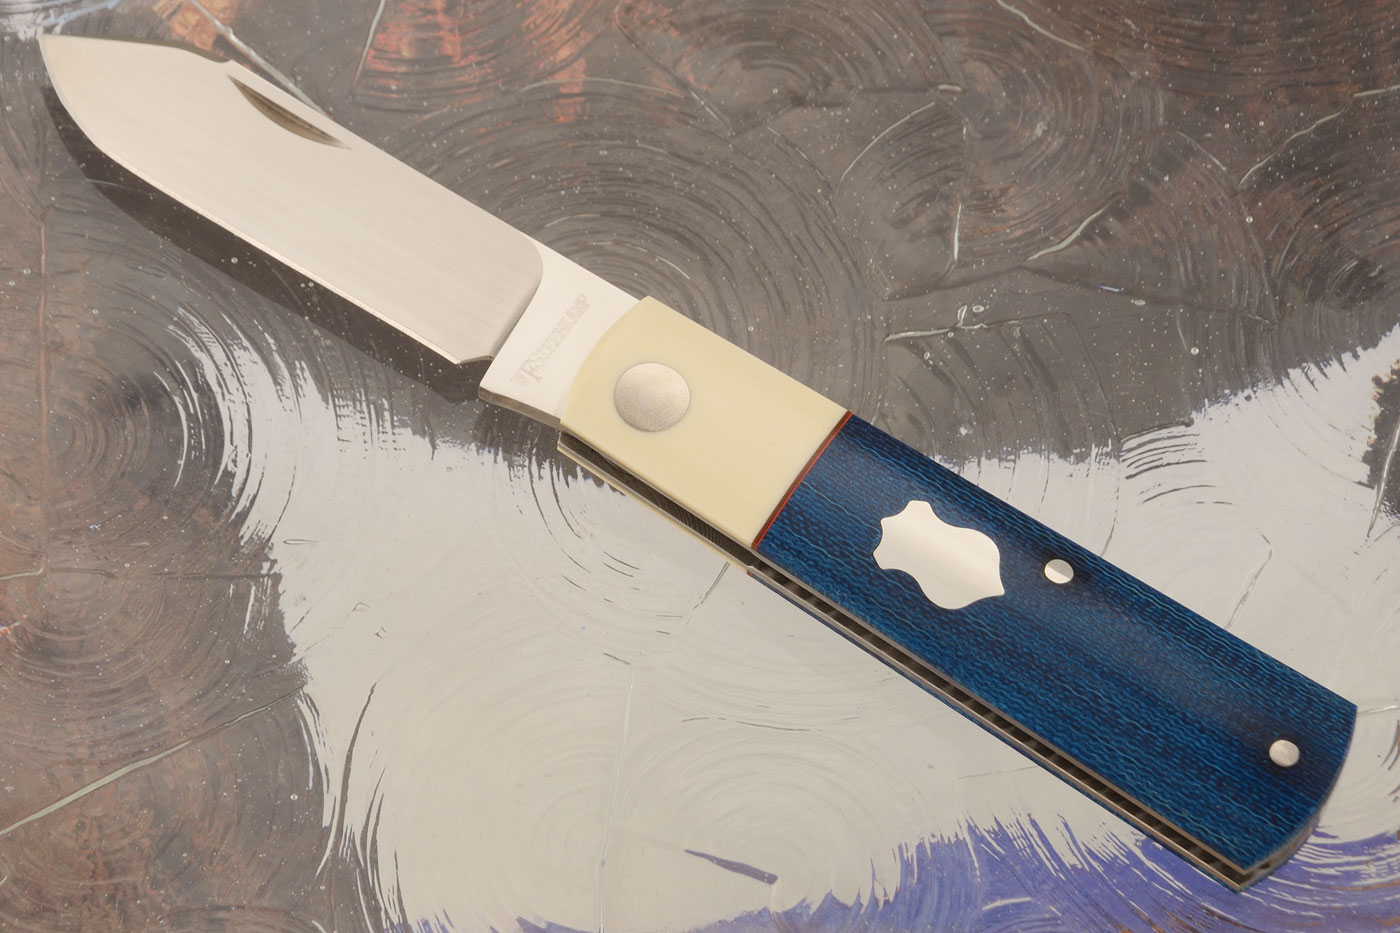 Barlow Slipjoint with Crosscut Micarta and Westinghouse Micarta - M390